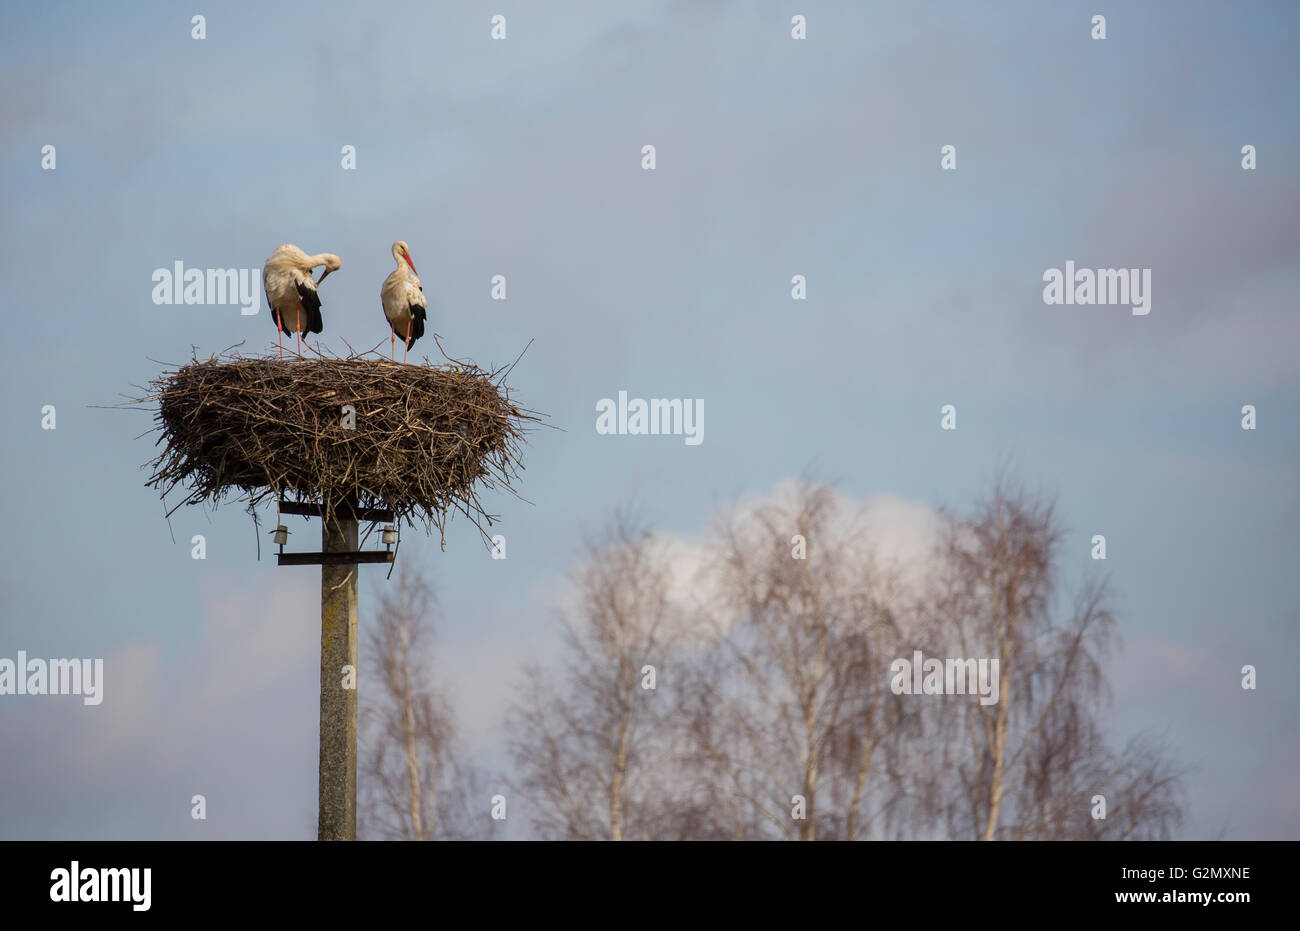 Couple of storks are standing in the nest on the electric pole Stock Photo